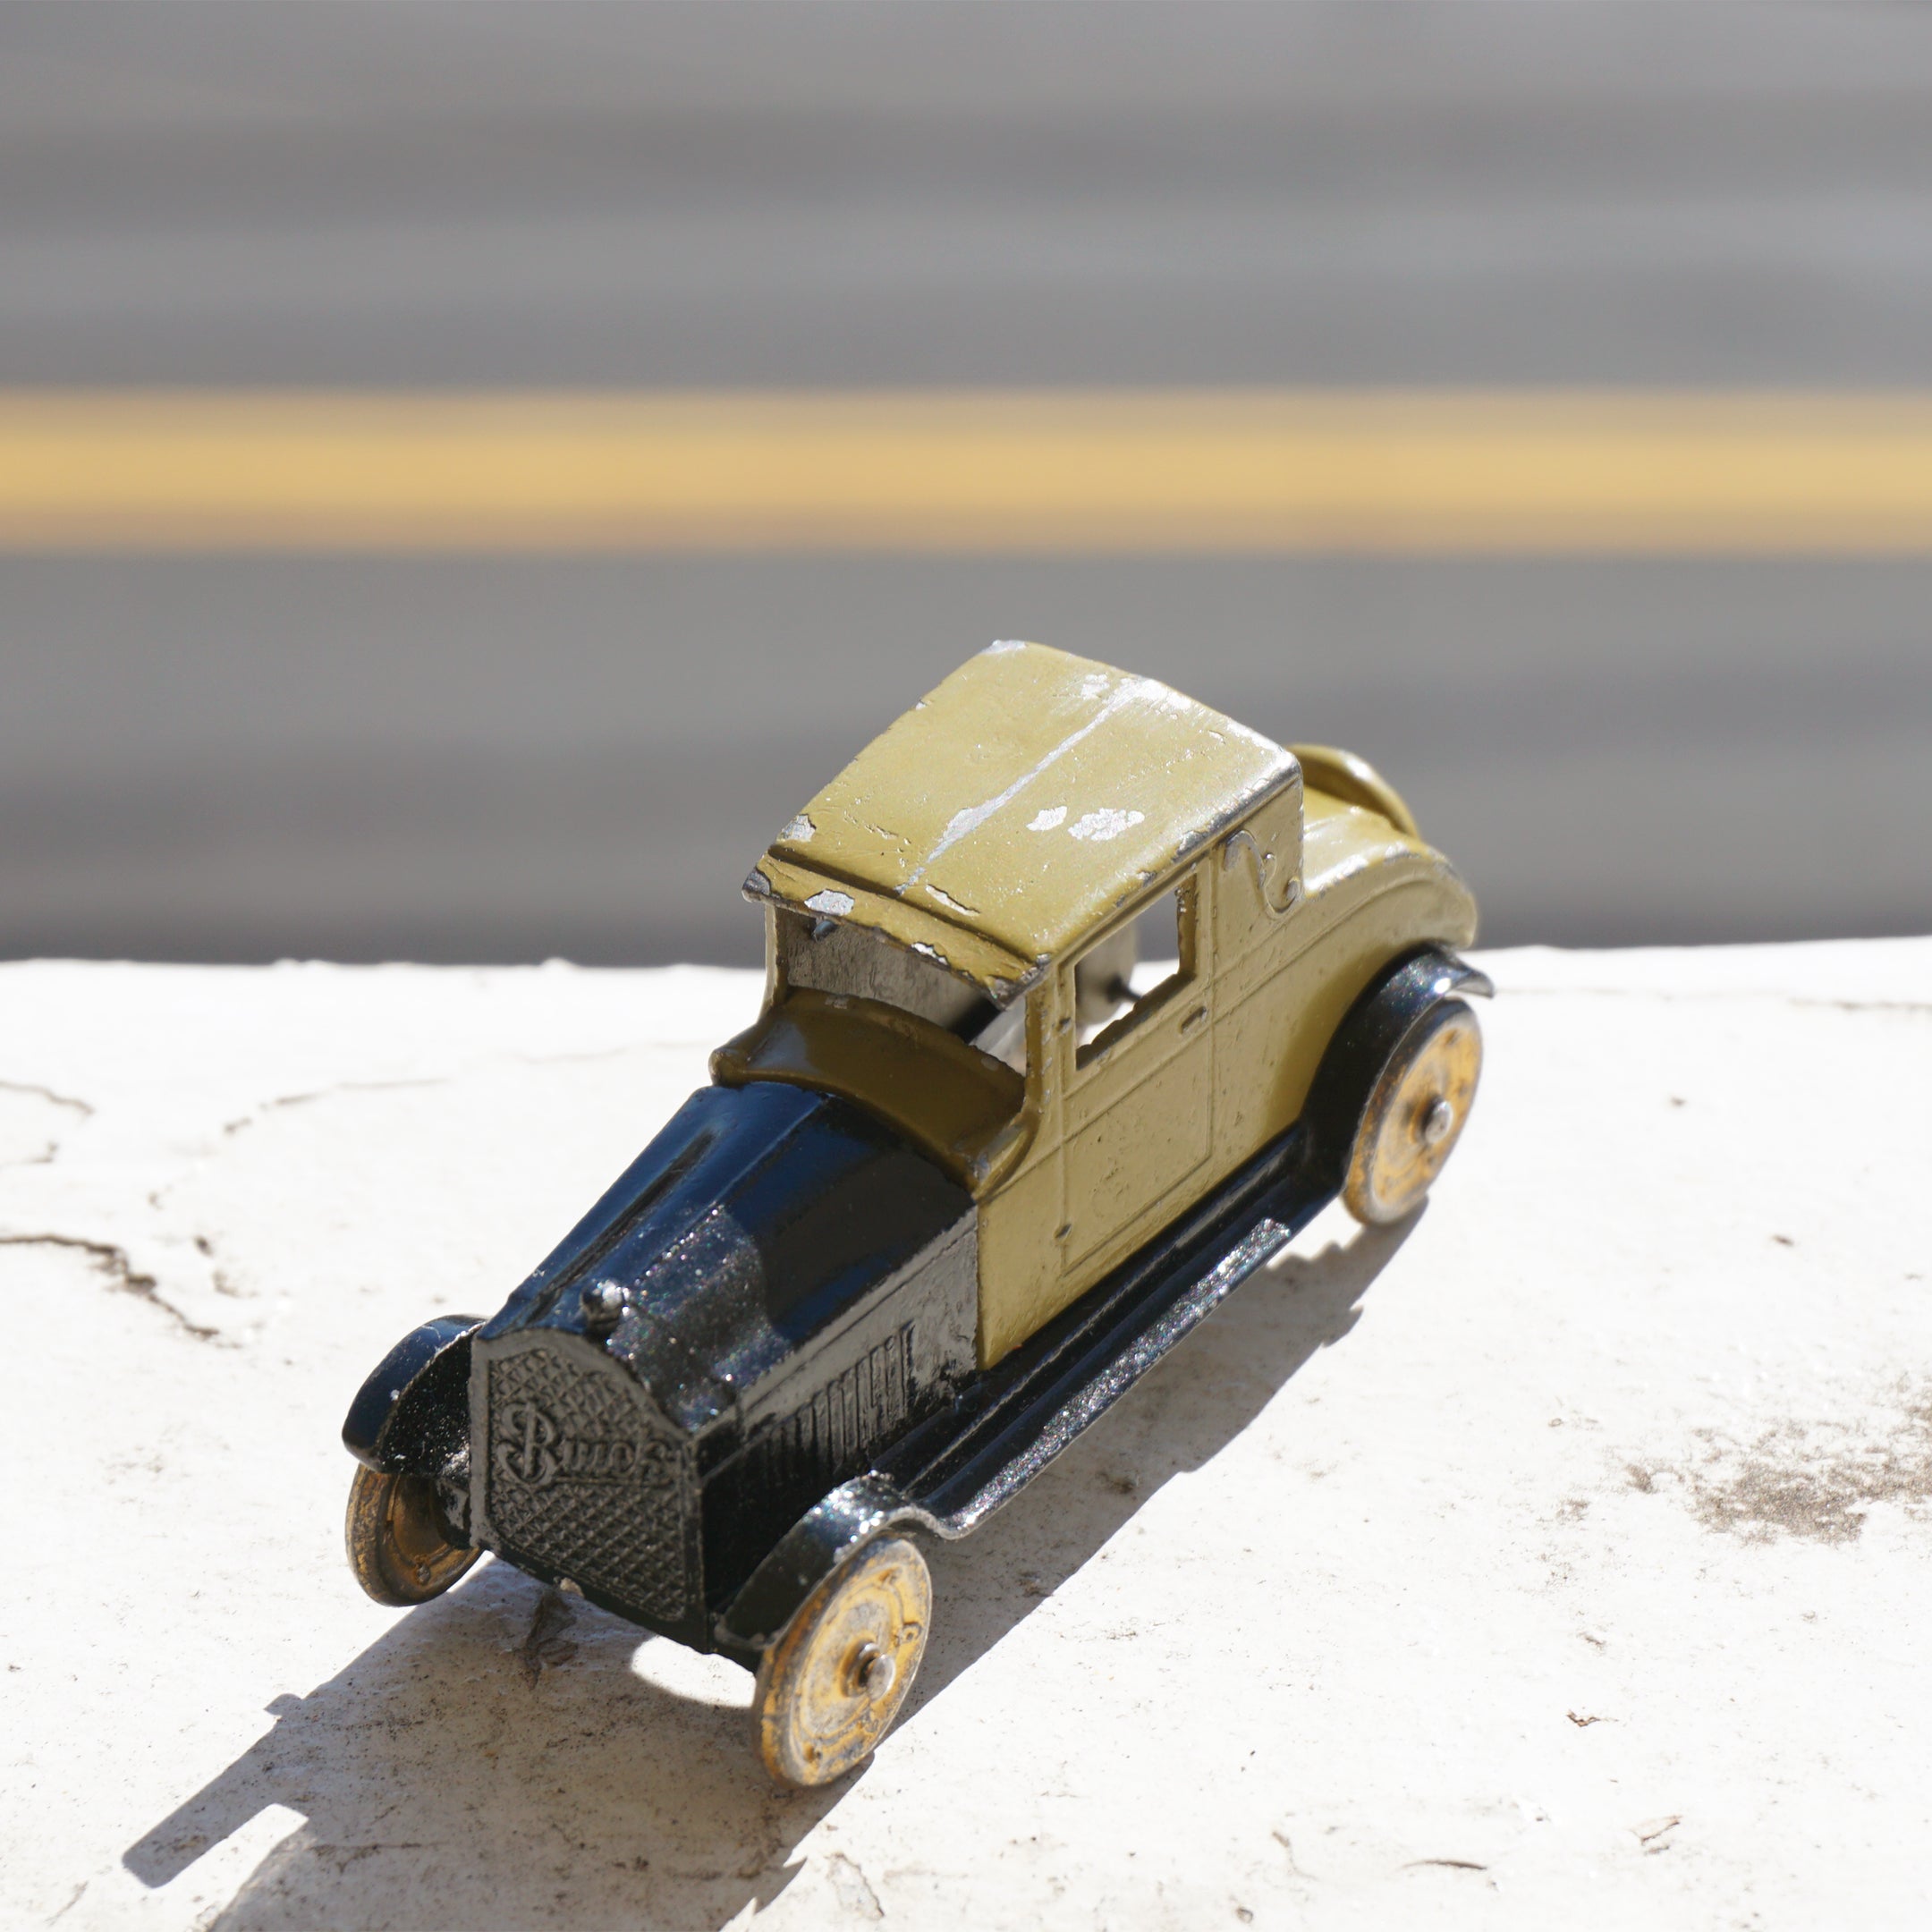 1927 Antique Diecast TOOTSIETOY GM Series Buick Coupe Toy Car. No. 6002